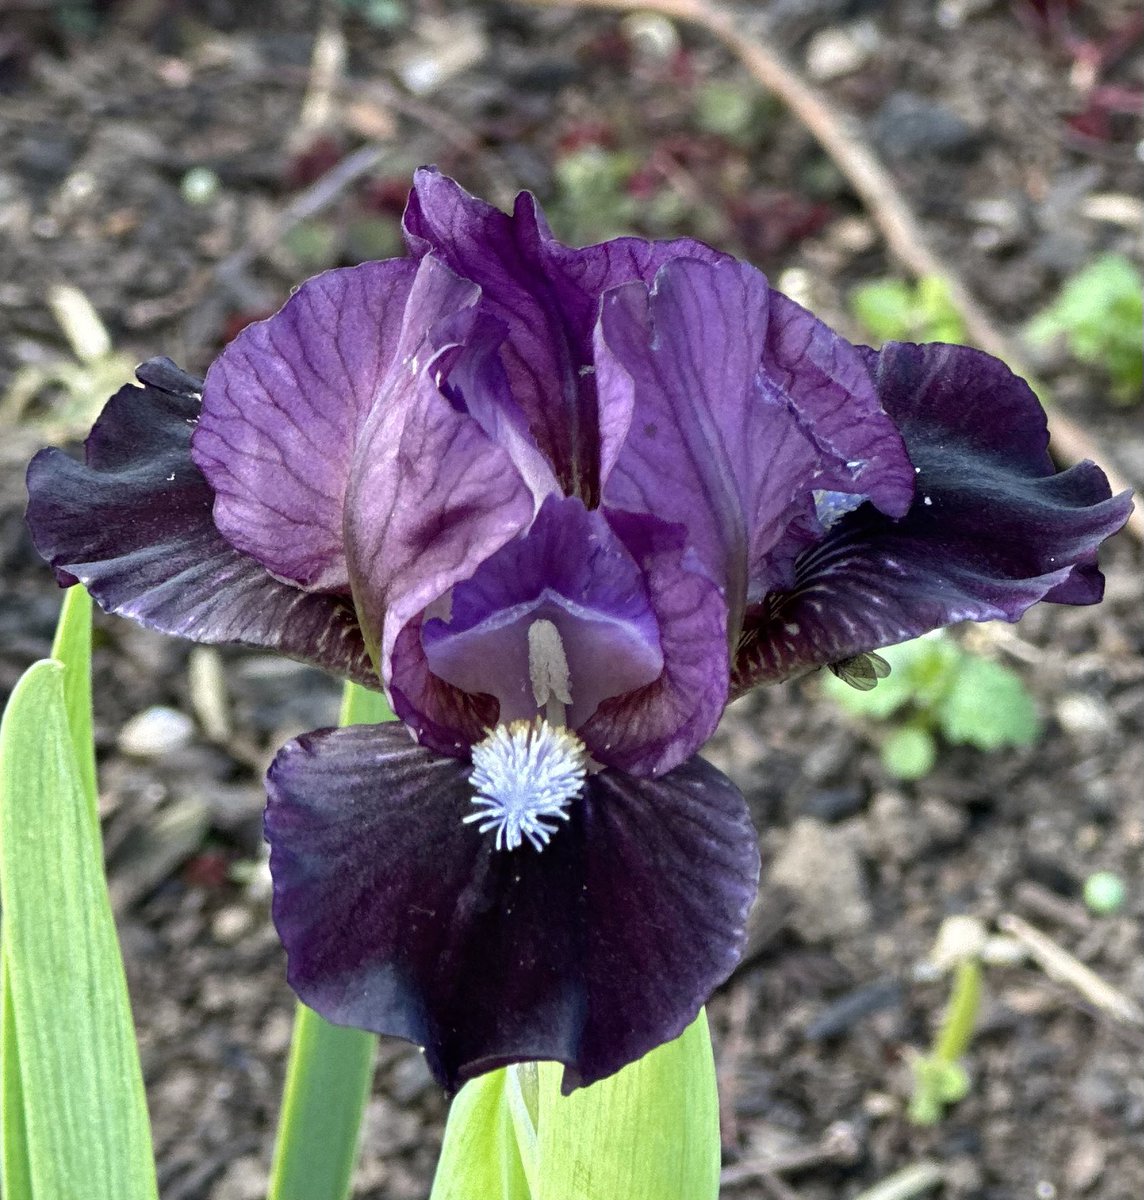 MDB Iris ‘Black Olive’ is doing well in the raised bed this season, it looks like we will have some available in August all being well! #miniaturedwarfbeardediris #blackolive #iris #black #olive #fieldgrown #barerootirises #seagatenurseries #irises